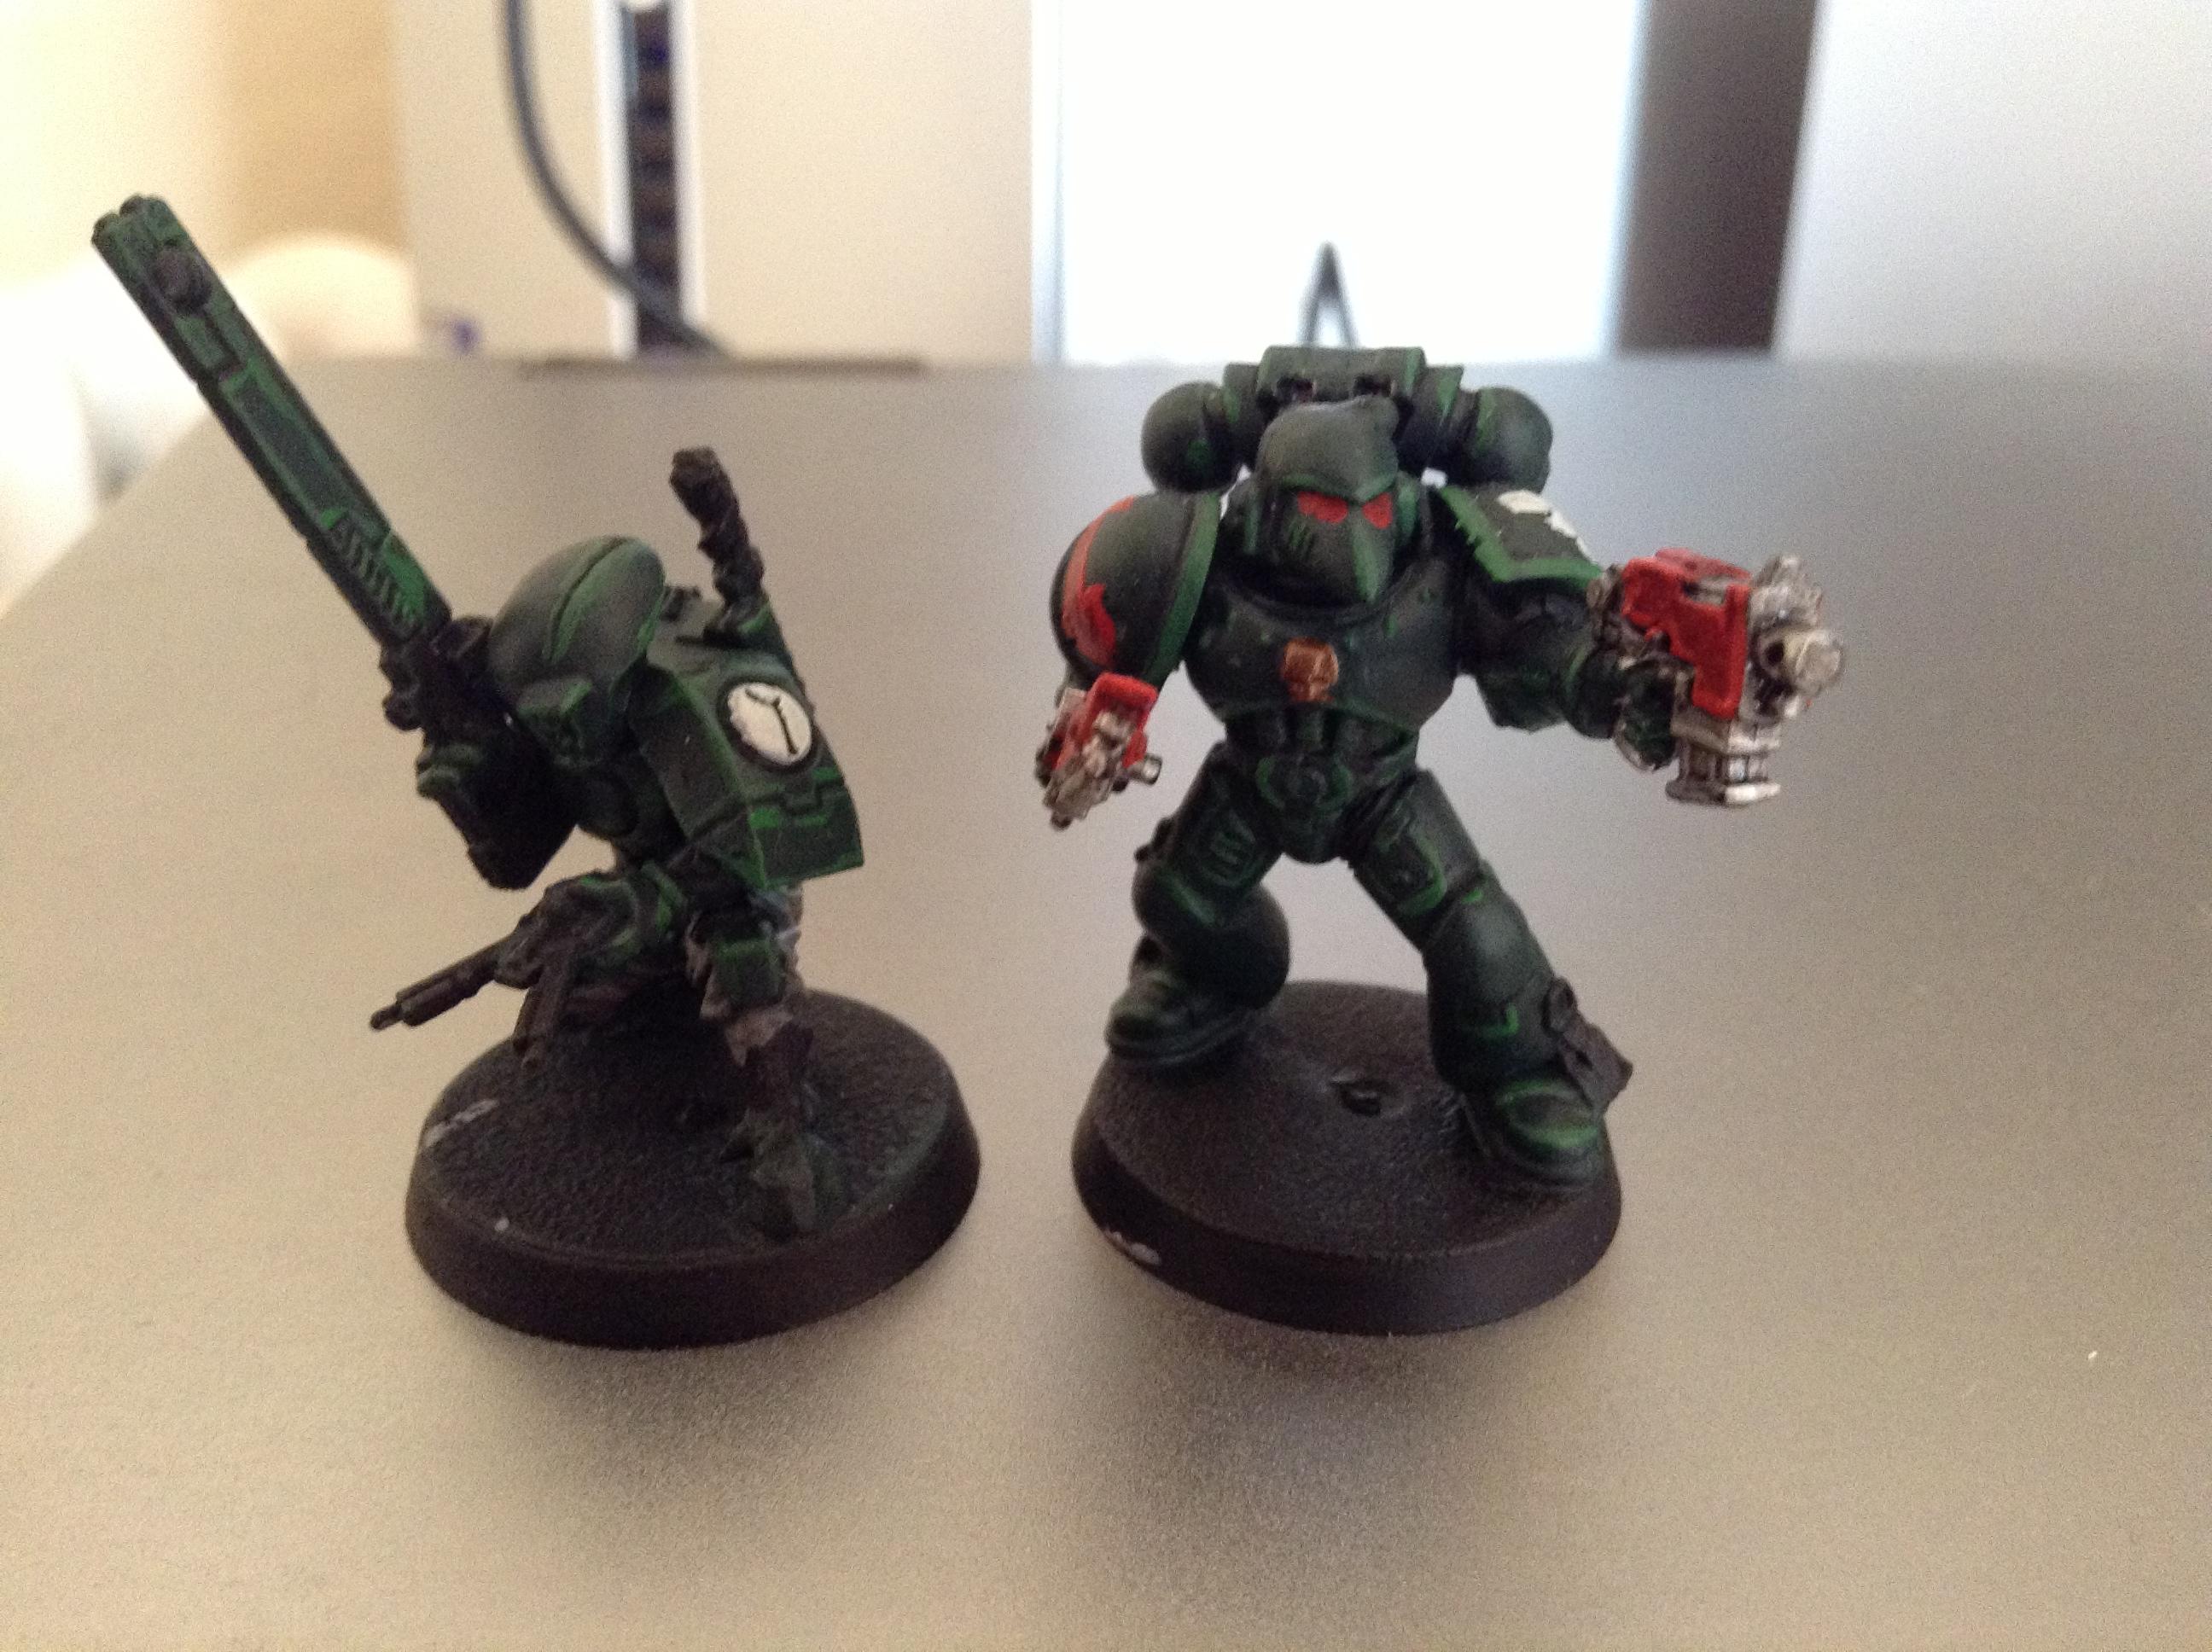 Fire Warrior next to his Battle Brother